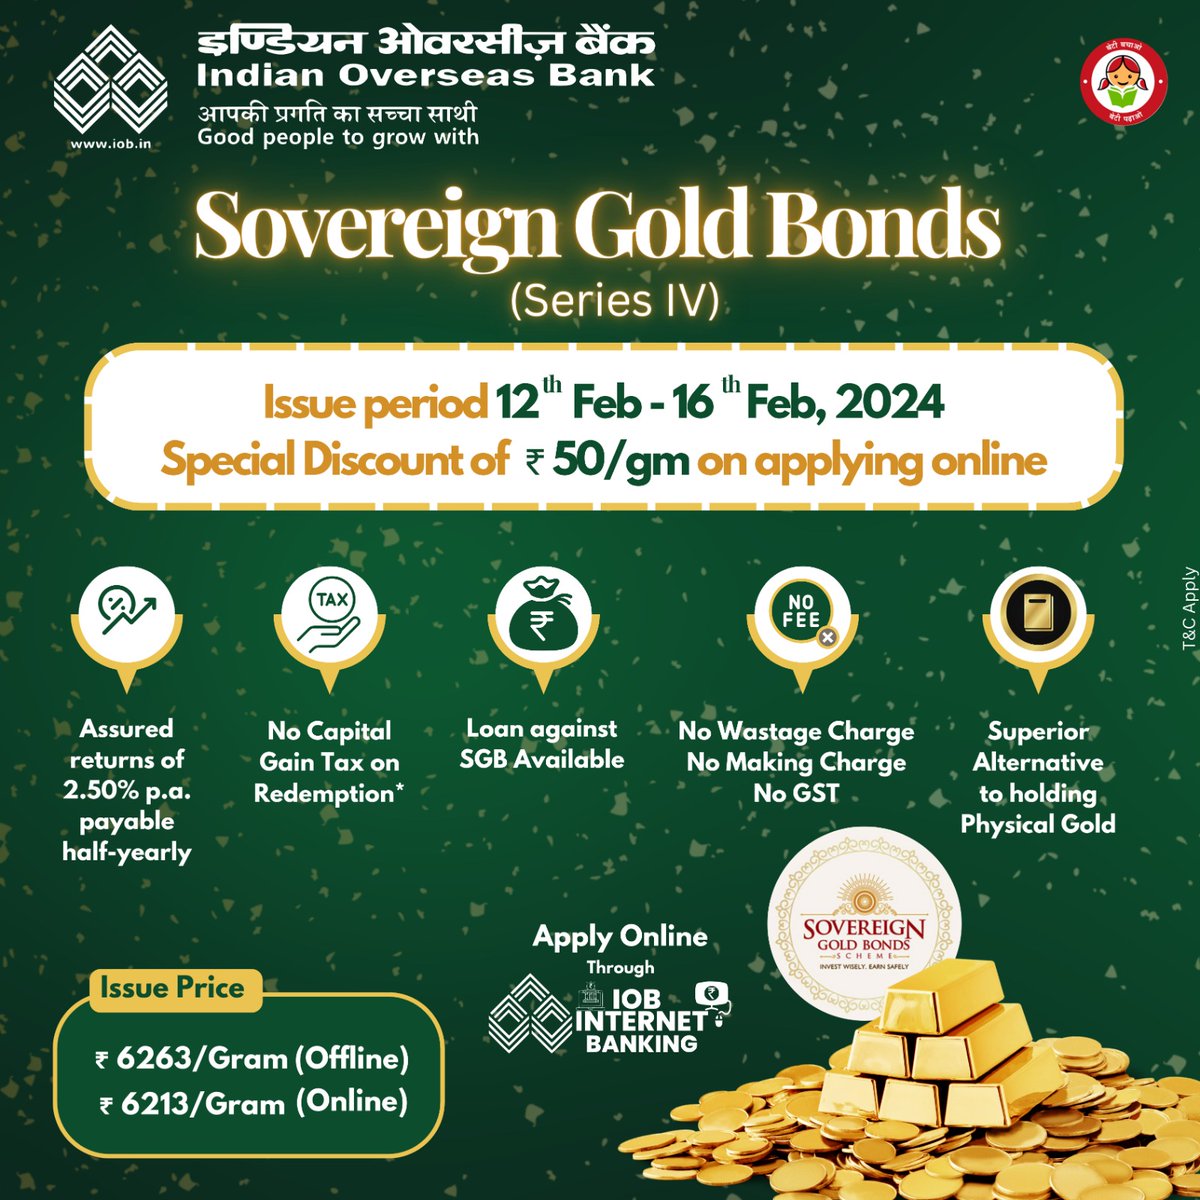 'Golden opportunity alert! Invest in a shining future with the Sovereign Gold Bond tranche, open from Feb 12-16, 2024. Secure your wealth the smart way!' #IOBSGB #SoverignGoldBond
iob.in/SGB-Sovereign-…
#IOB #IndianOverseasBank #DFS #RBI #goldbond #investments #future #savings